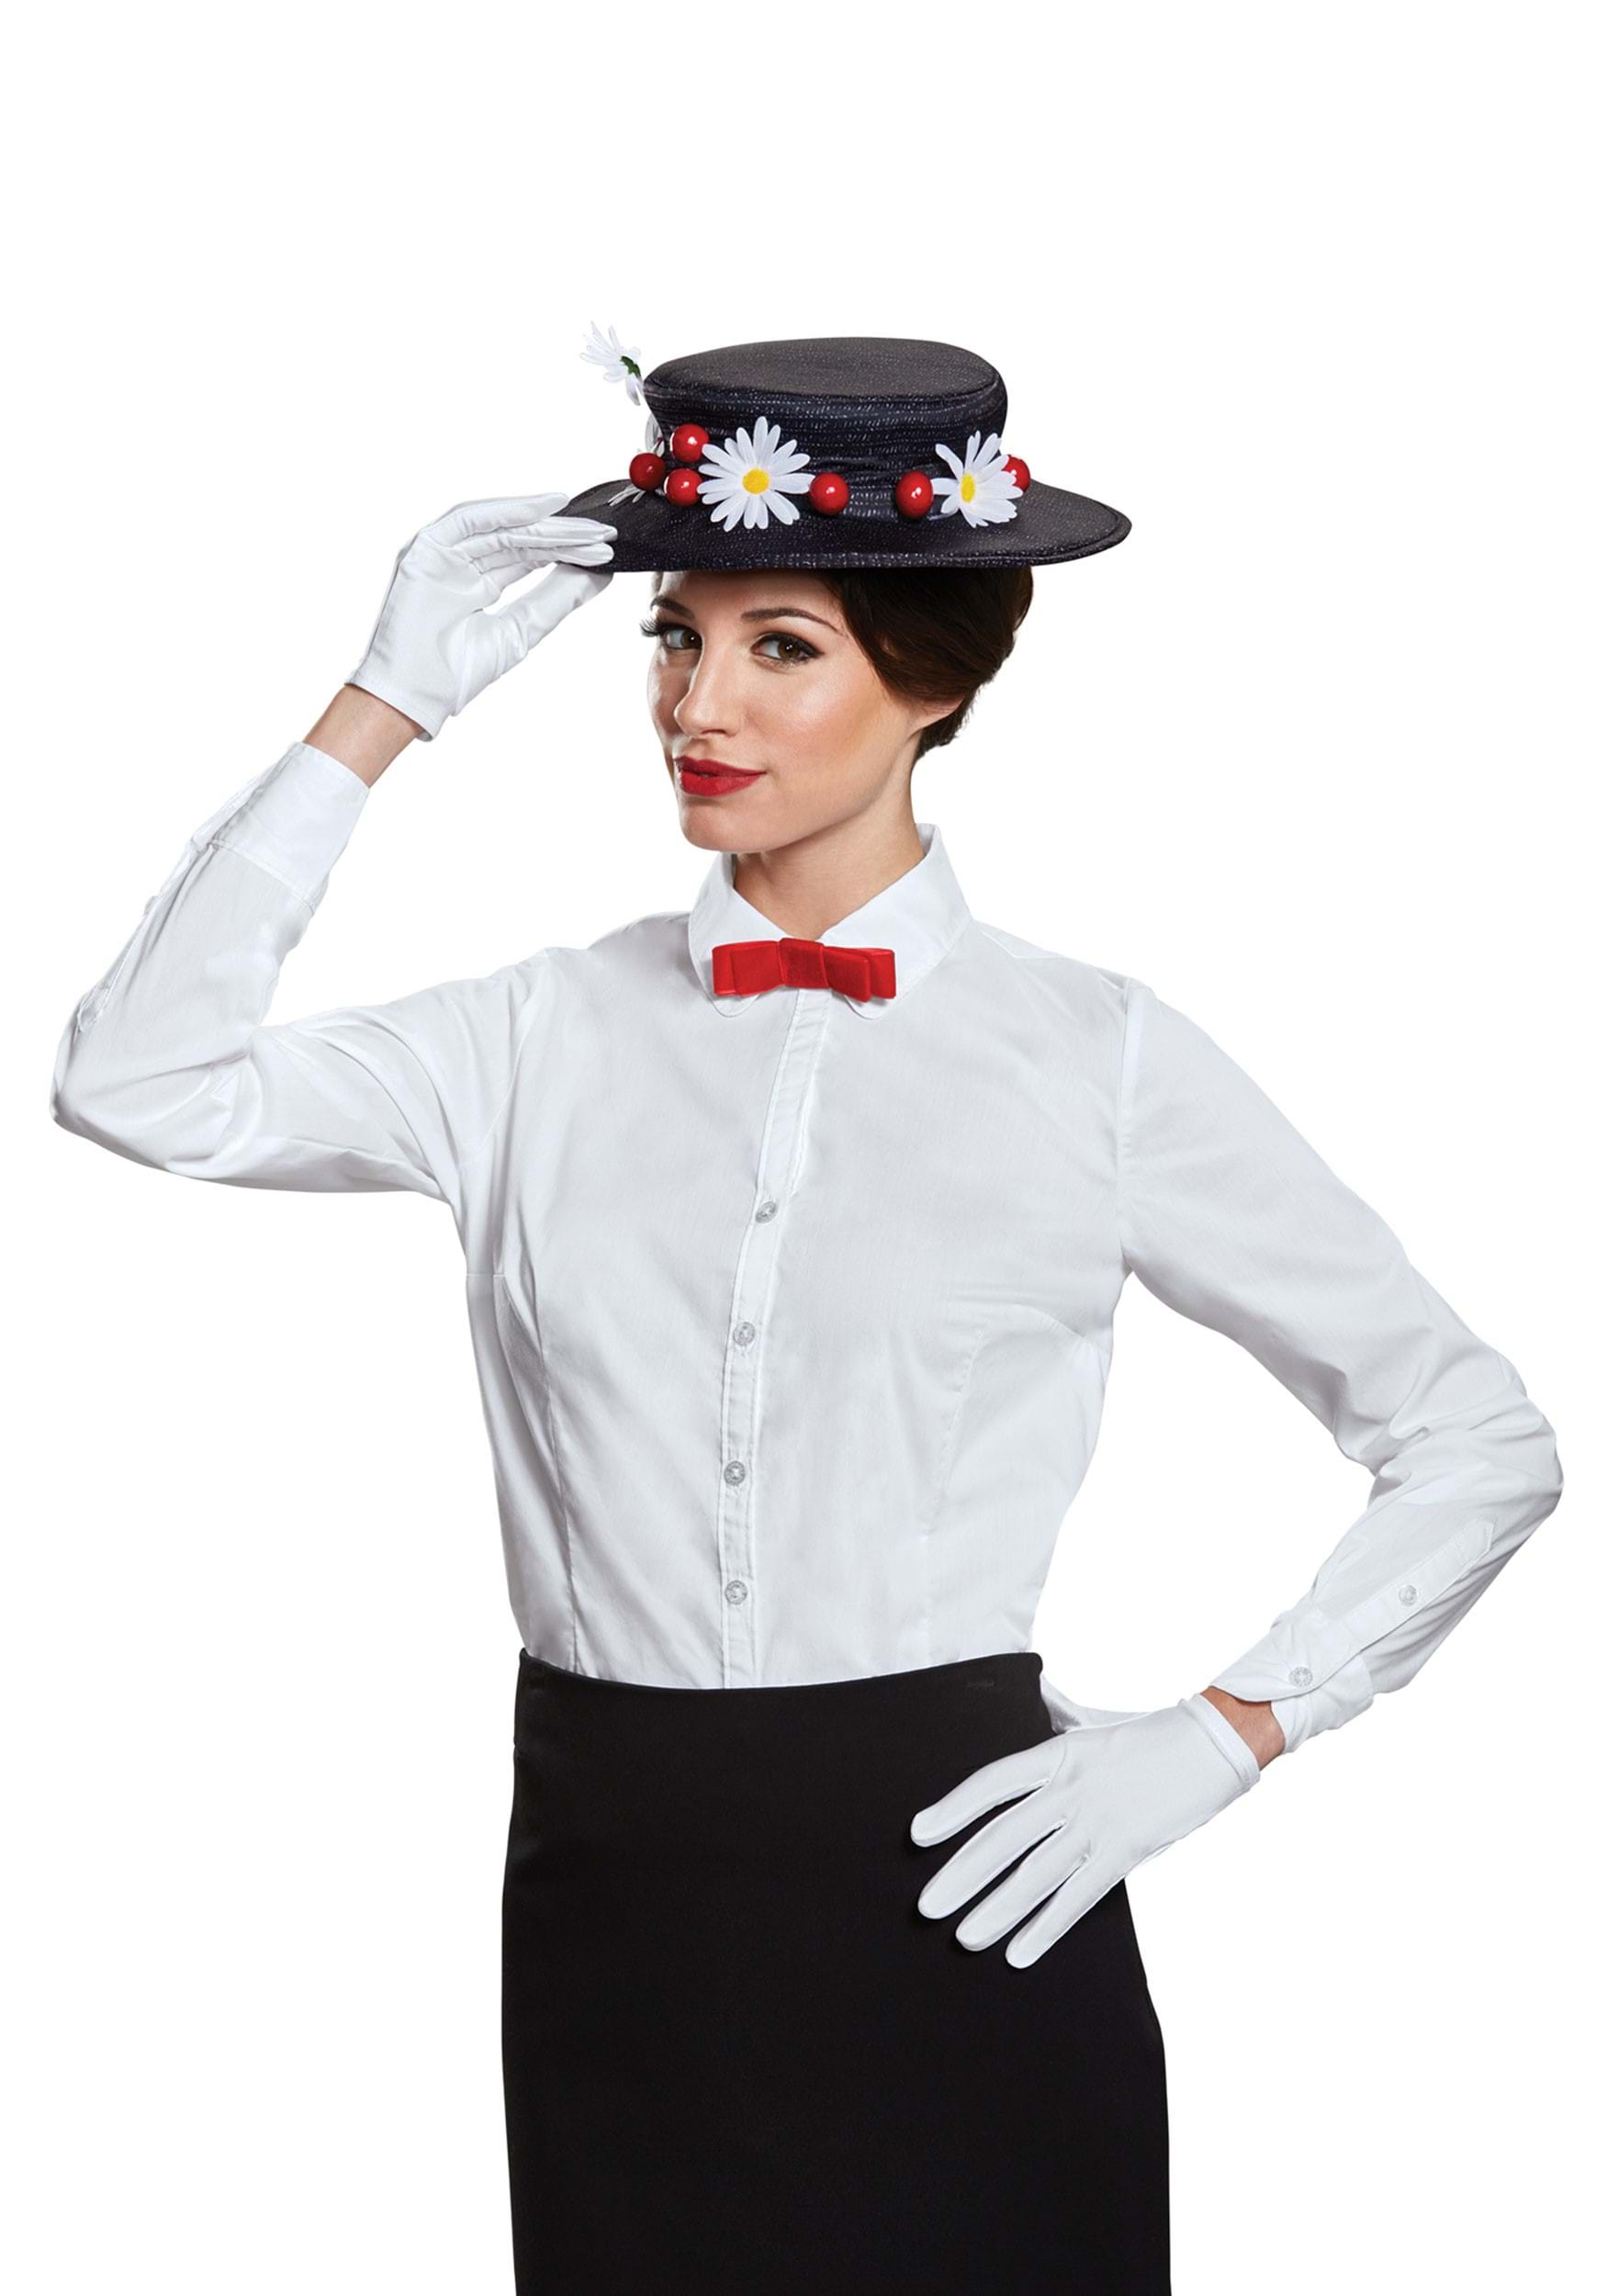 Disney Mary Poppins Costume Kit For Women , Disney Accessories